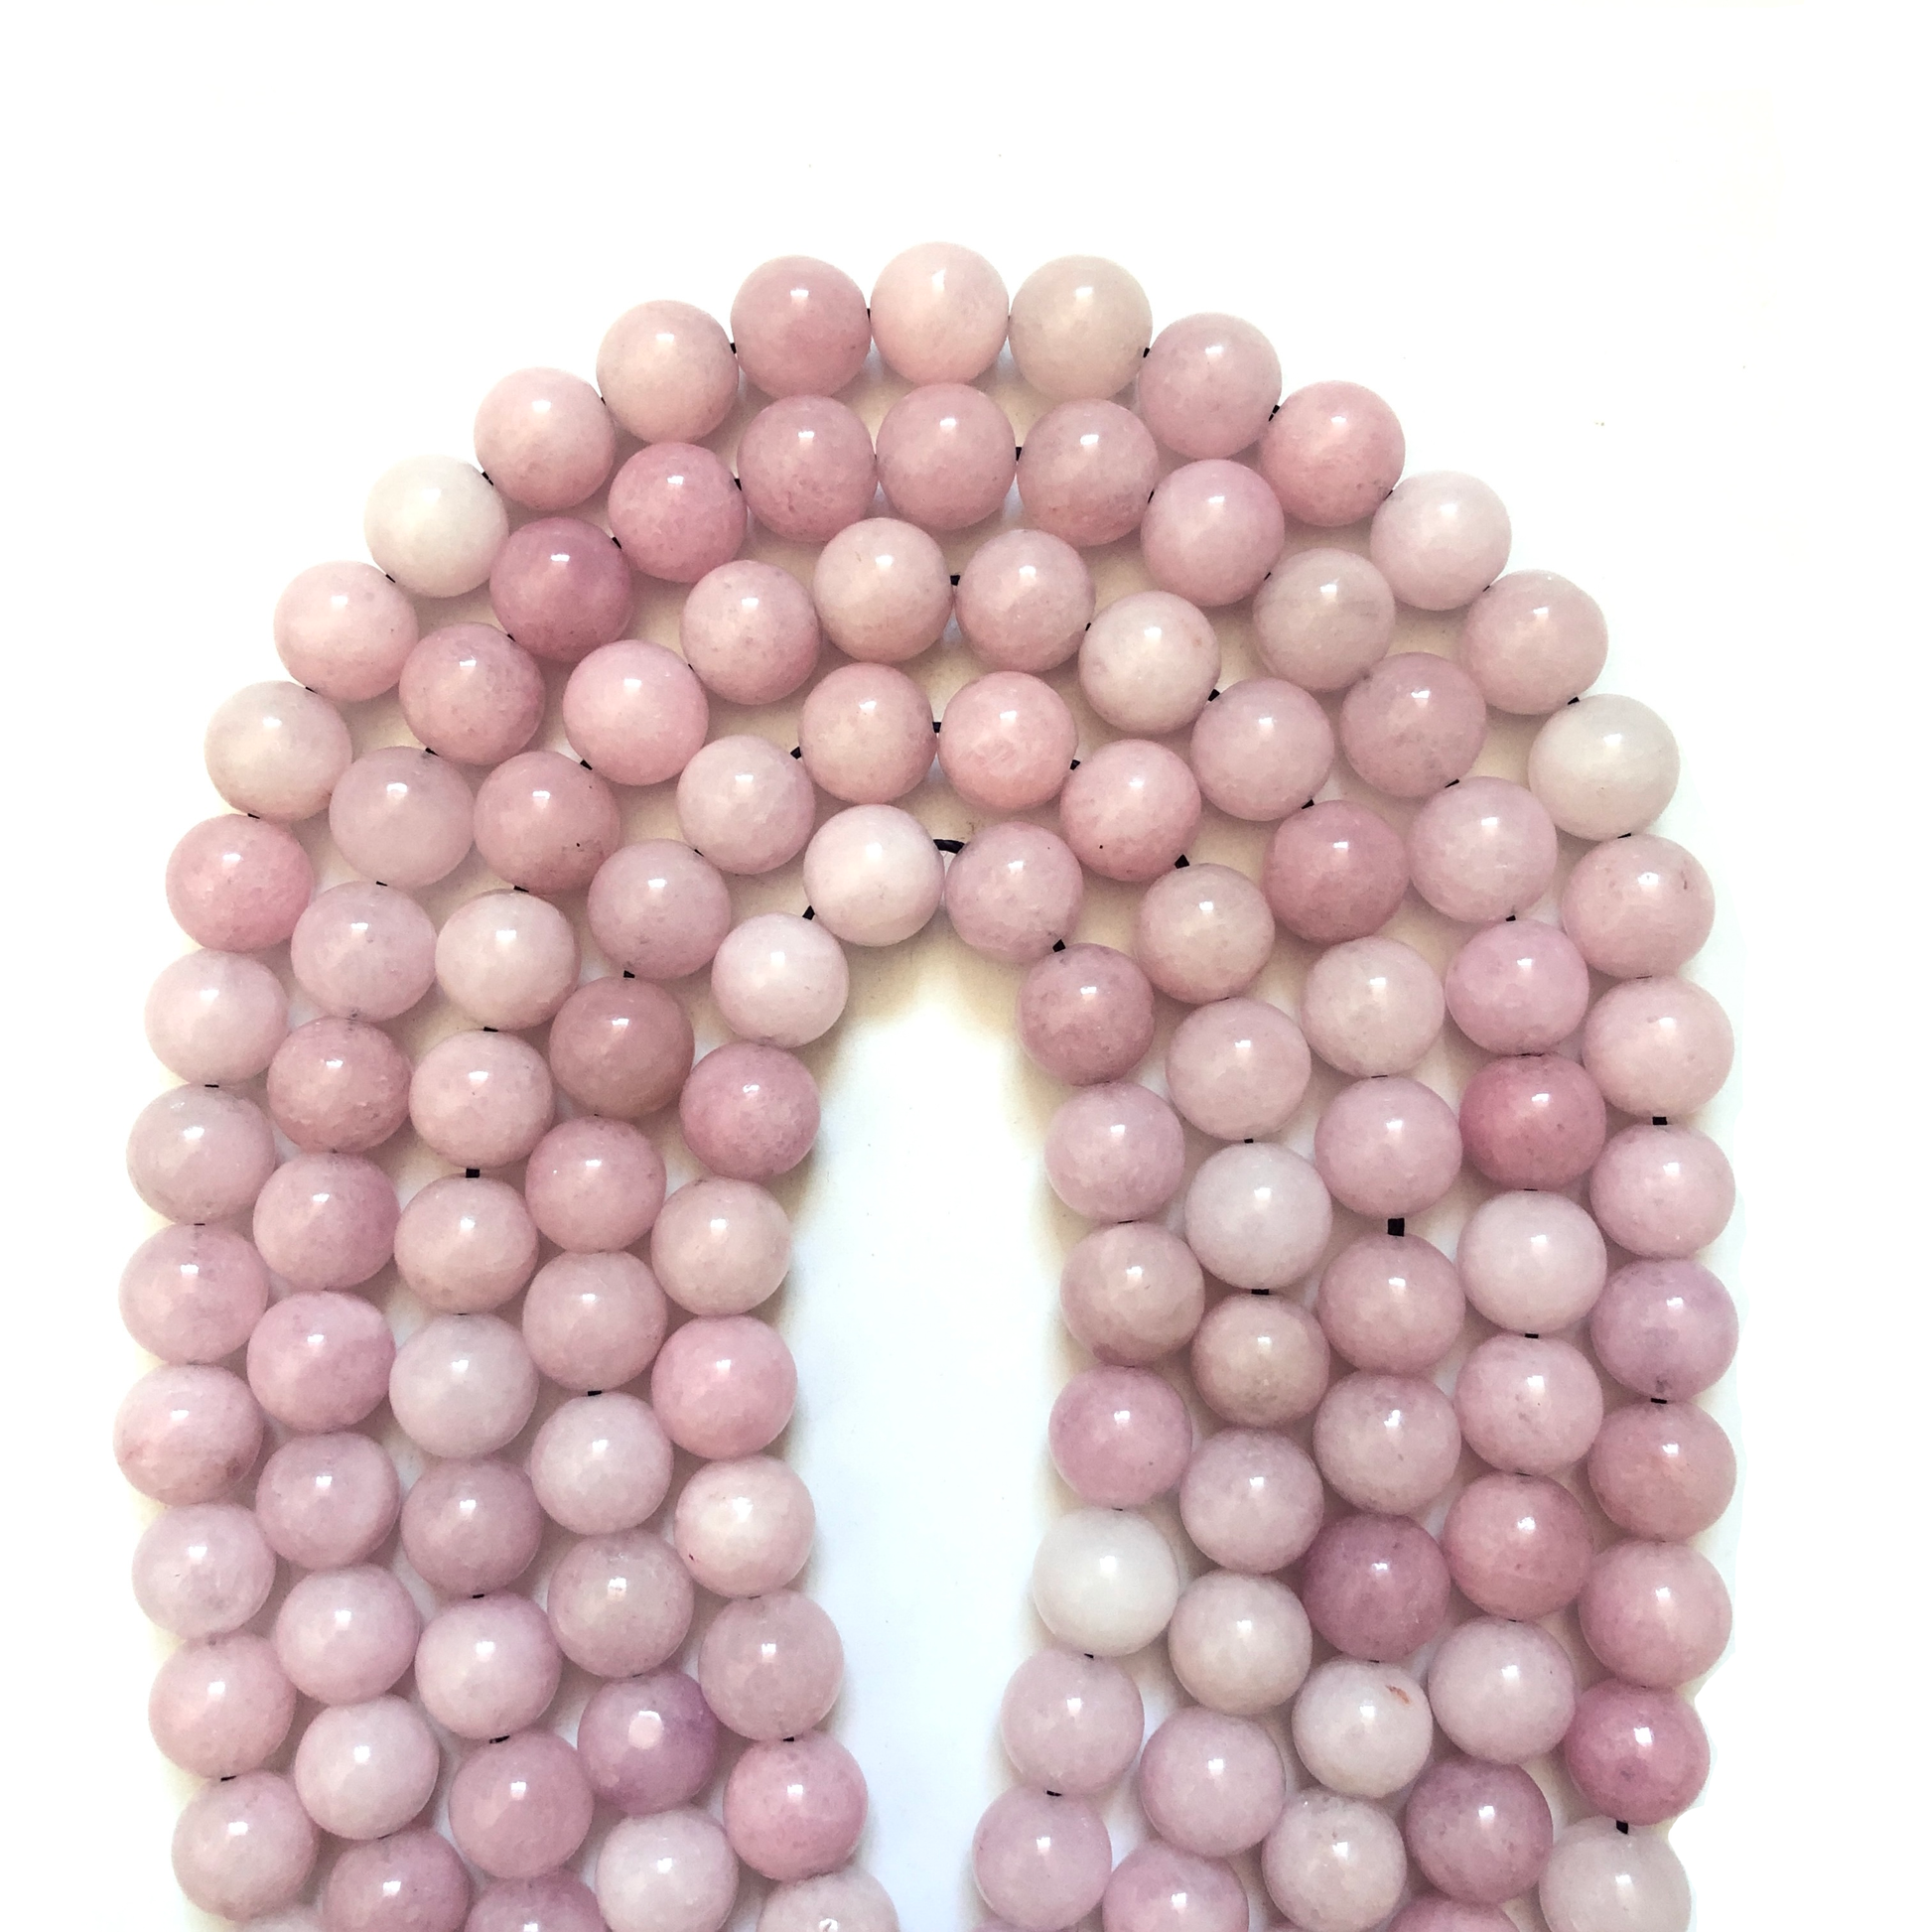 2 Strands/lot 10mm Multicolor Quartz Round Stone Beads Pink Kunzite Stone Beads New Beads Arrivals Other Stone Beads Charms Beads Beyond